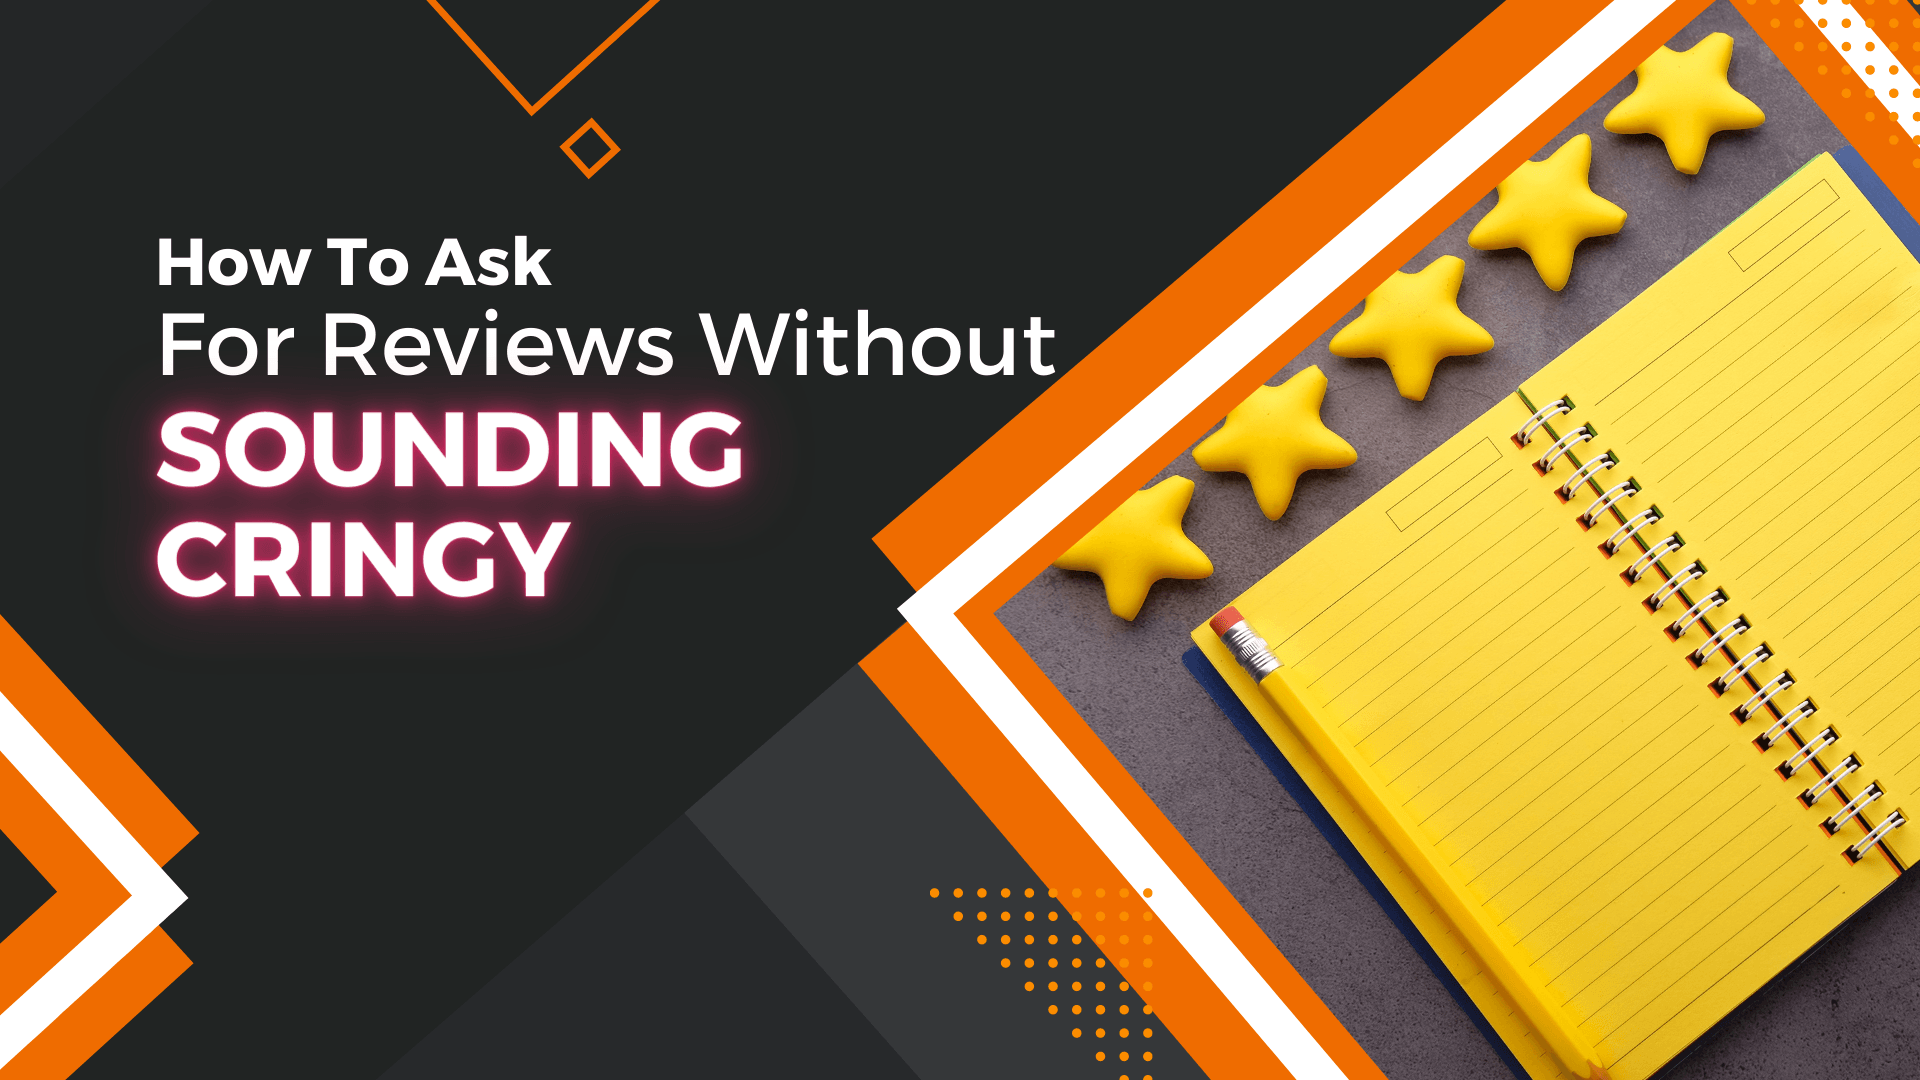 How To Ask For Reviews Without Sounding Cringy